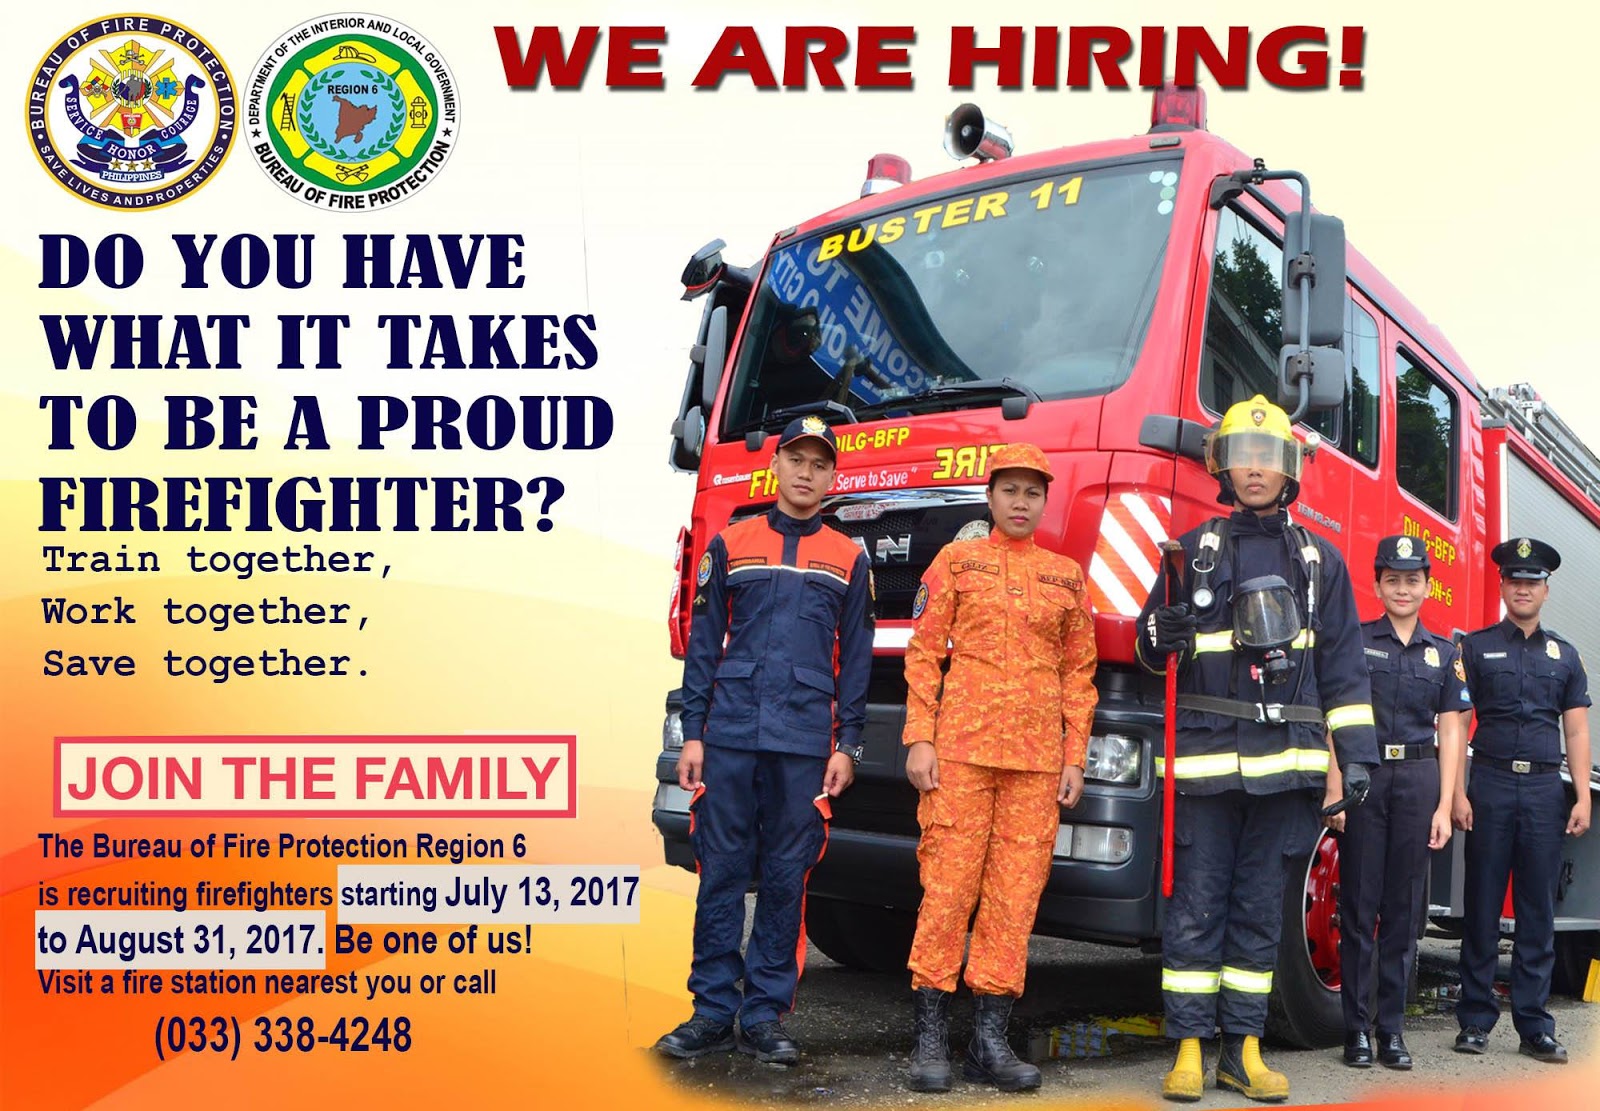 bfp fire officer hiring region requirements reviewer qualification qualifications general rank